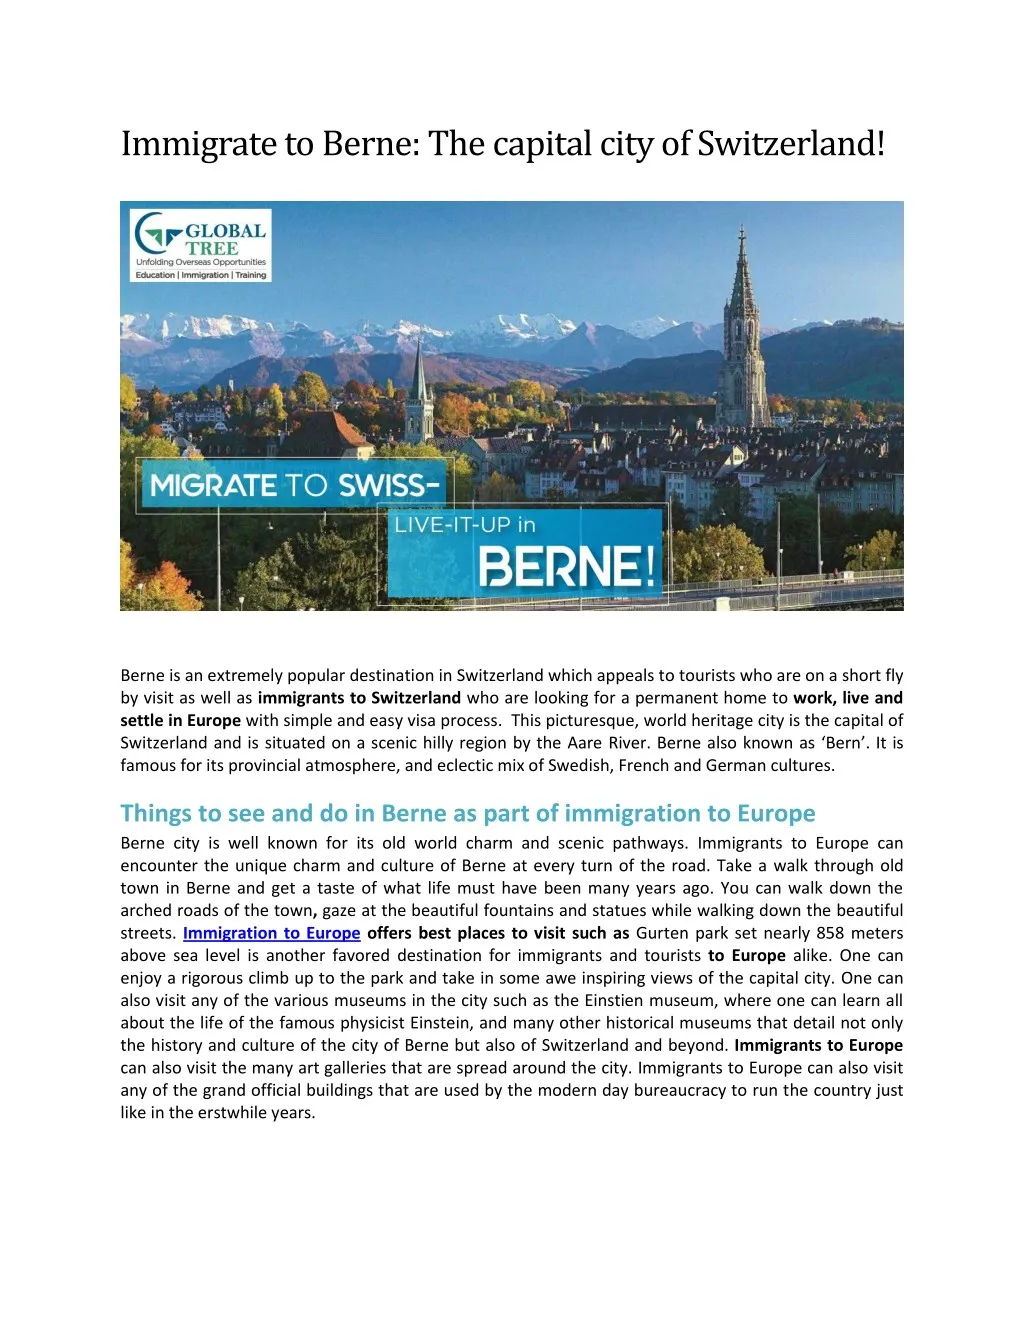 immigrate to berne the capital city of switzerland